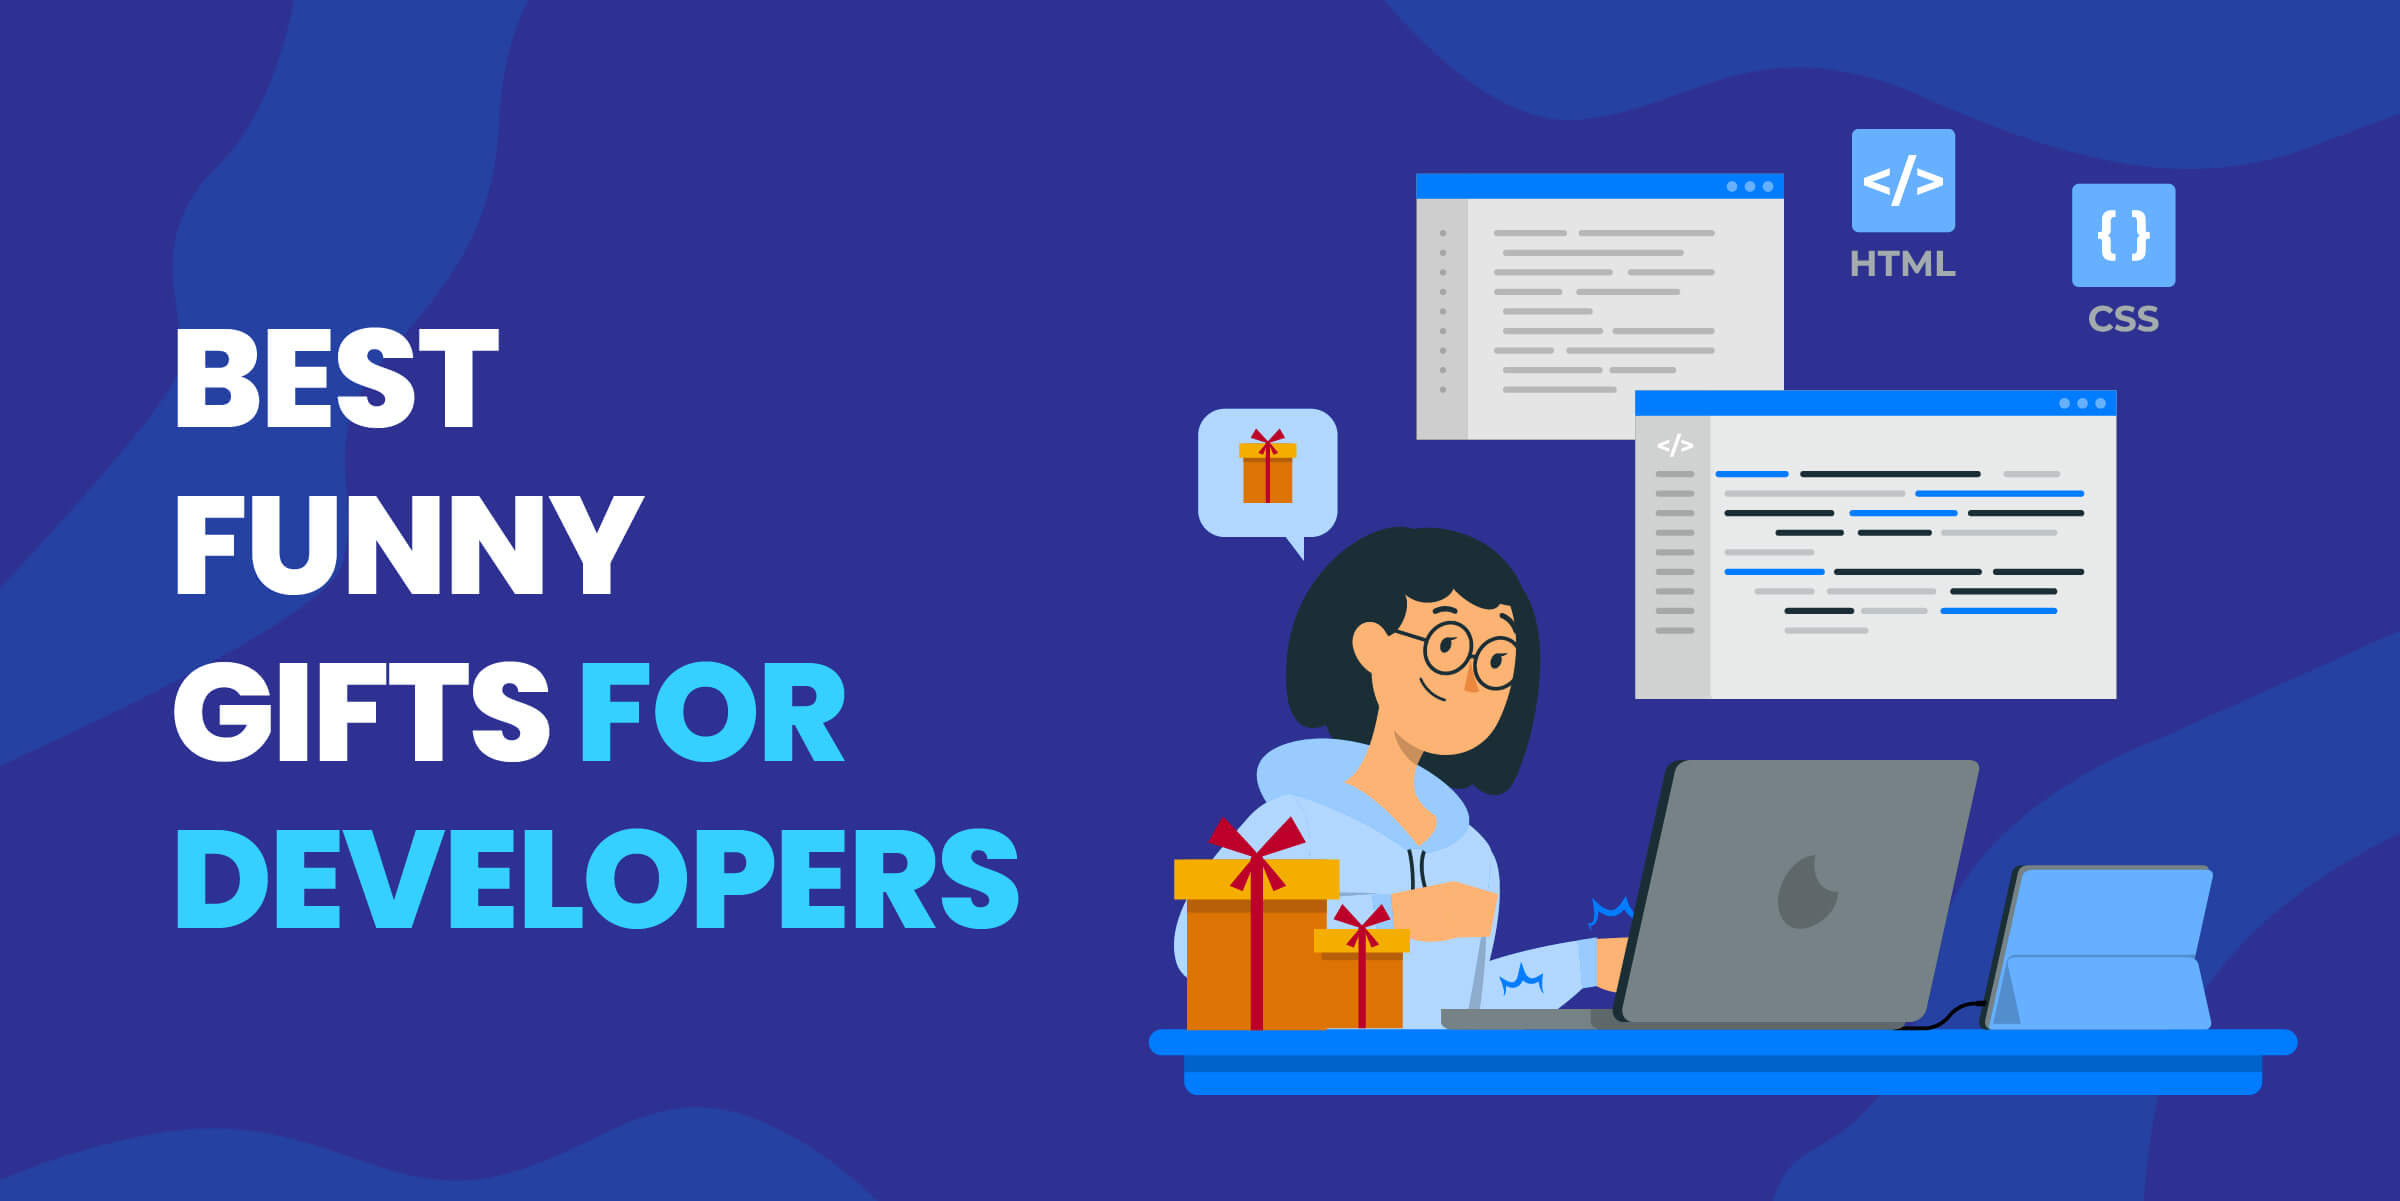 Best Funny Gifts for Developers